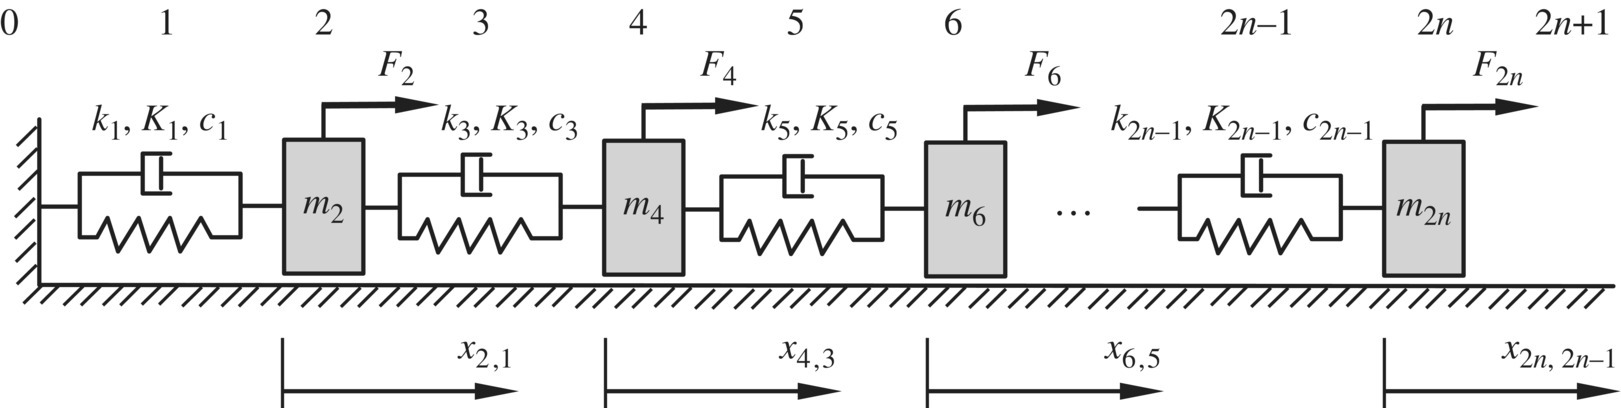 An n degrees of freedom vibration system depicted by 4 boxes labeled m2, m4, m6, and m2n connected by 4 springs with 4 rightward arrows labeled F2, F4, F6, and F2n. Right arrow at the bottom labeled x2,1, x4,3, etc.